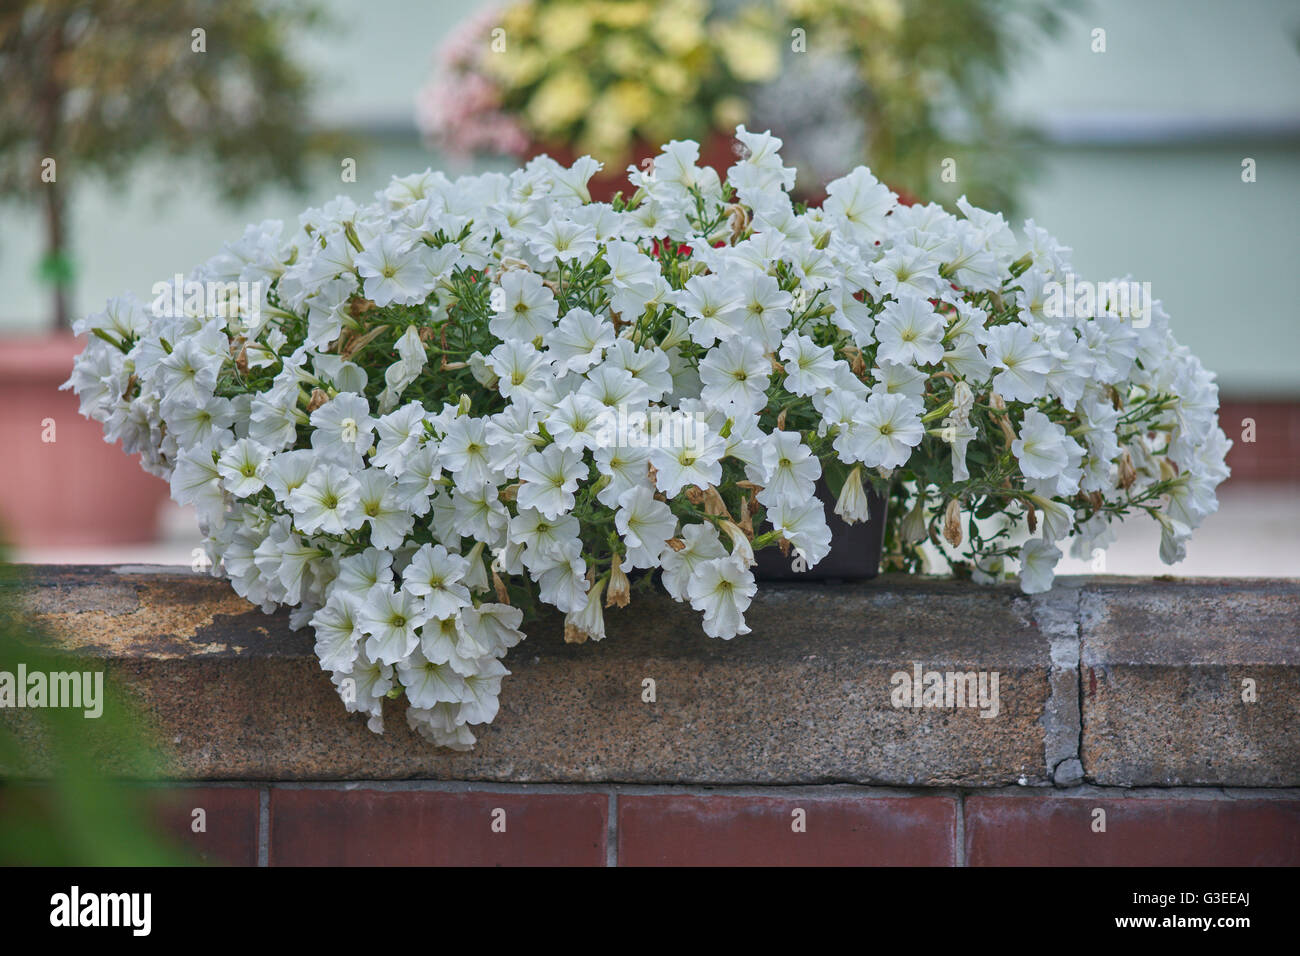 Lush white petunias blooming in the flower pot Stock Photo